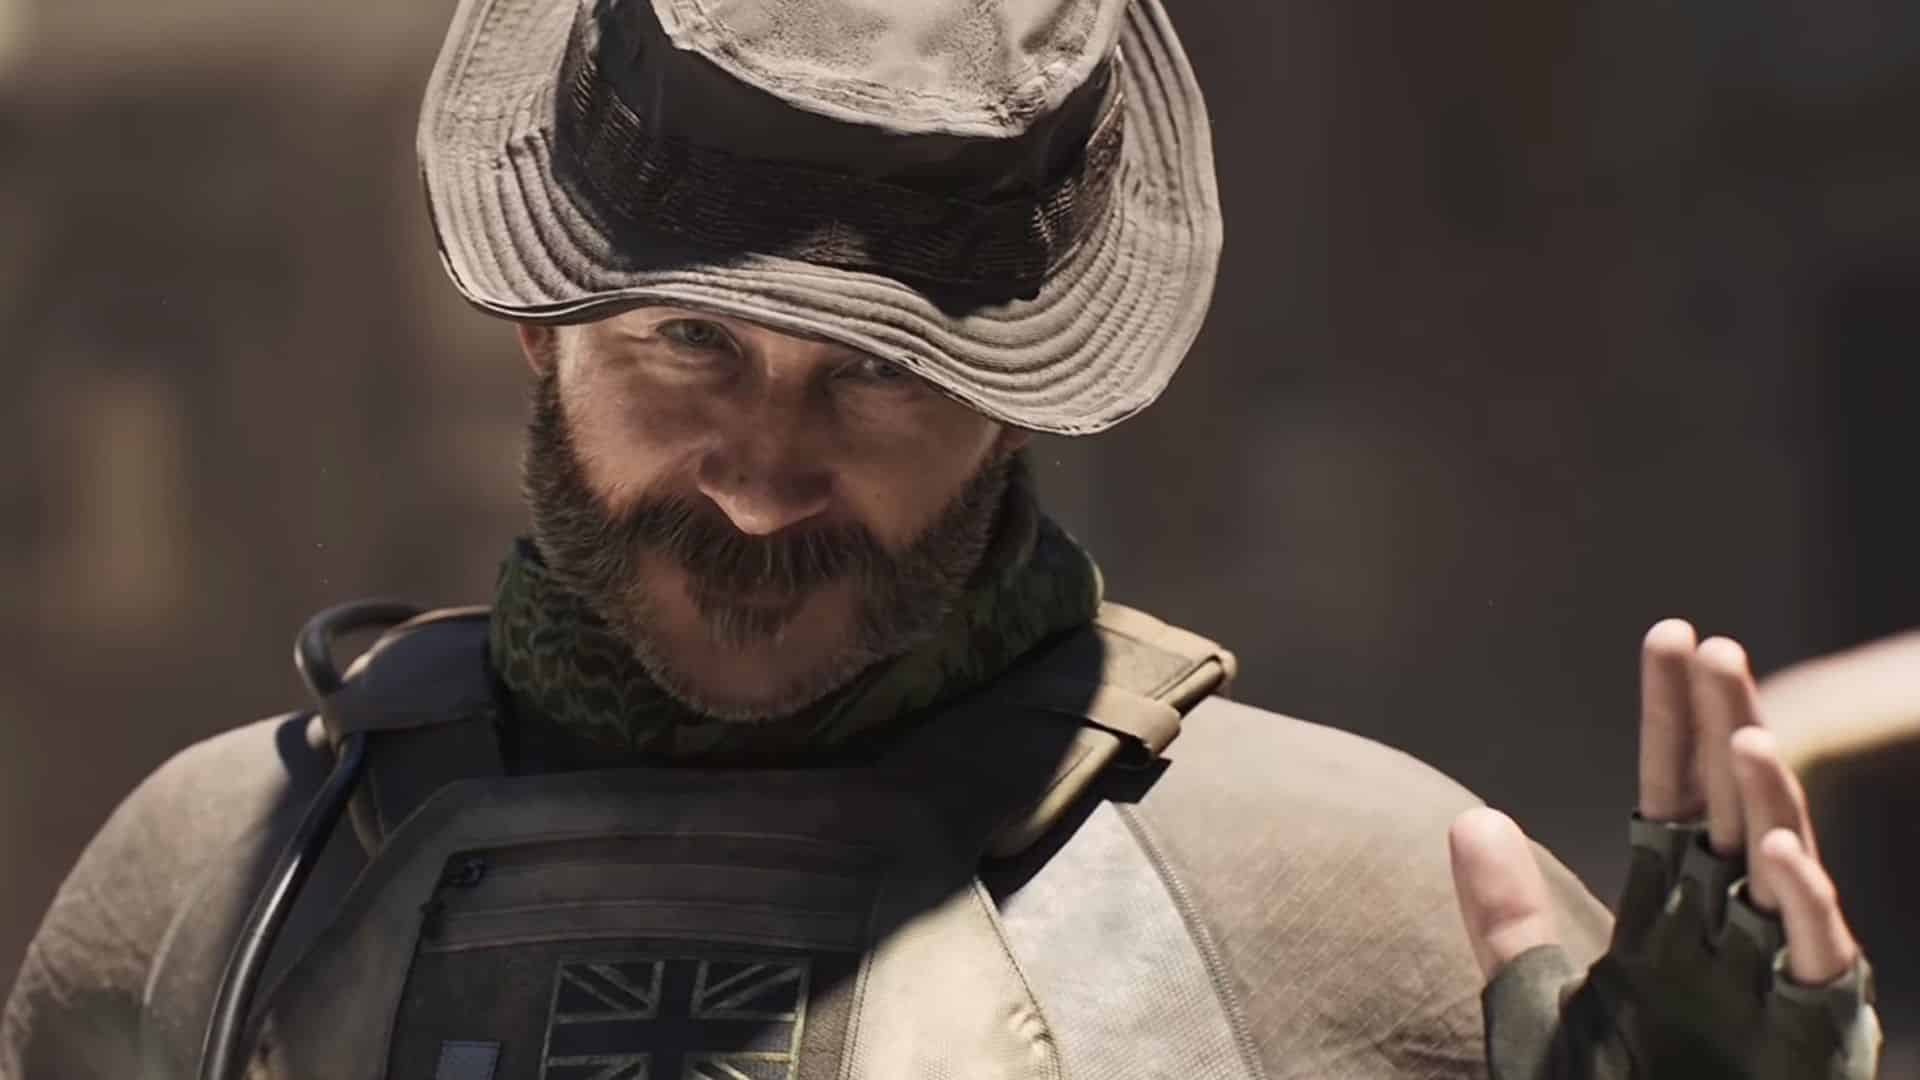 Captain Price gesturing and smiling in CoD